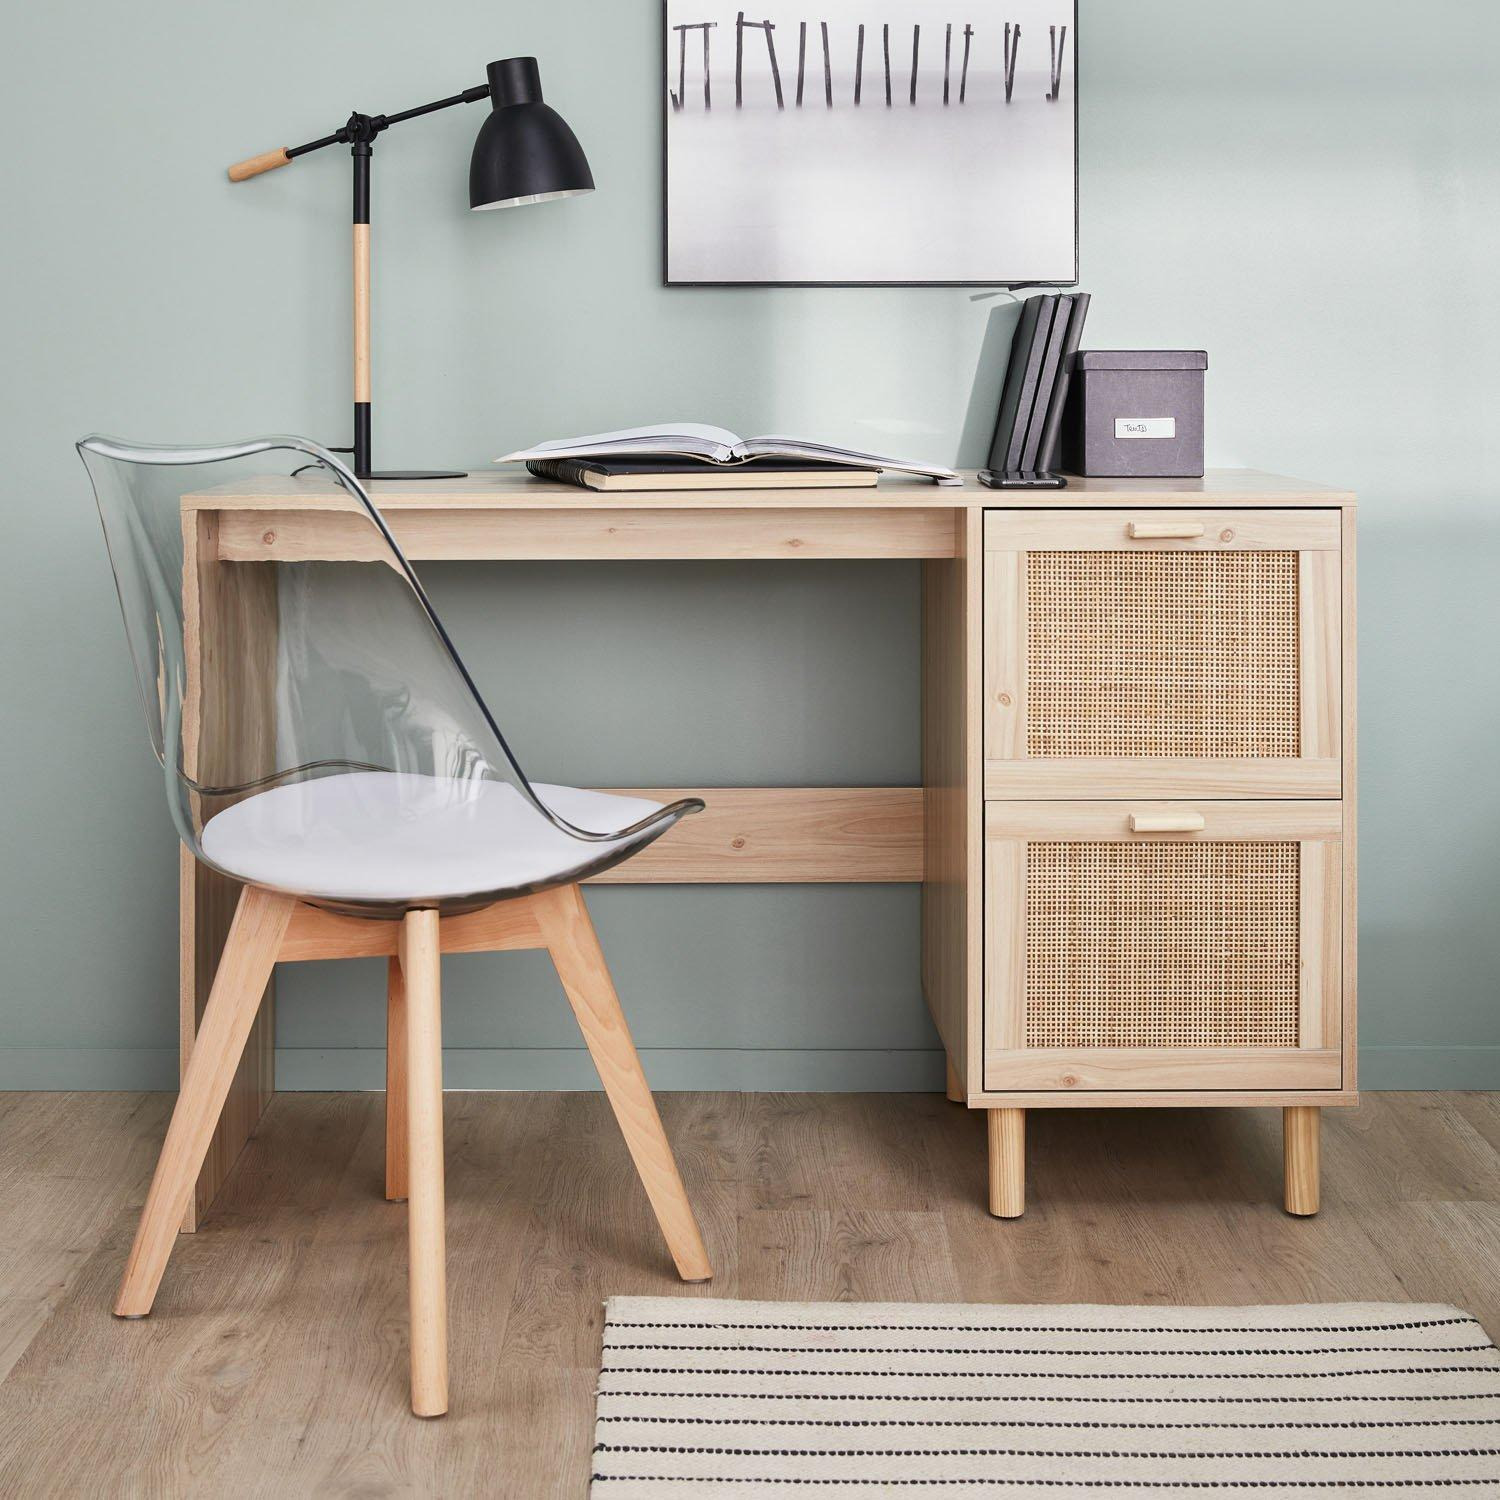 Woven Rattan Desk With 2 Drawers - image 1